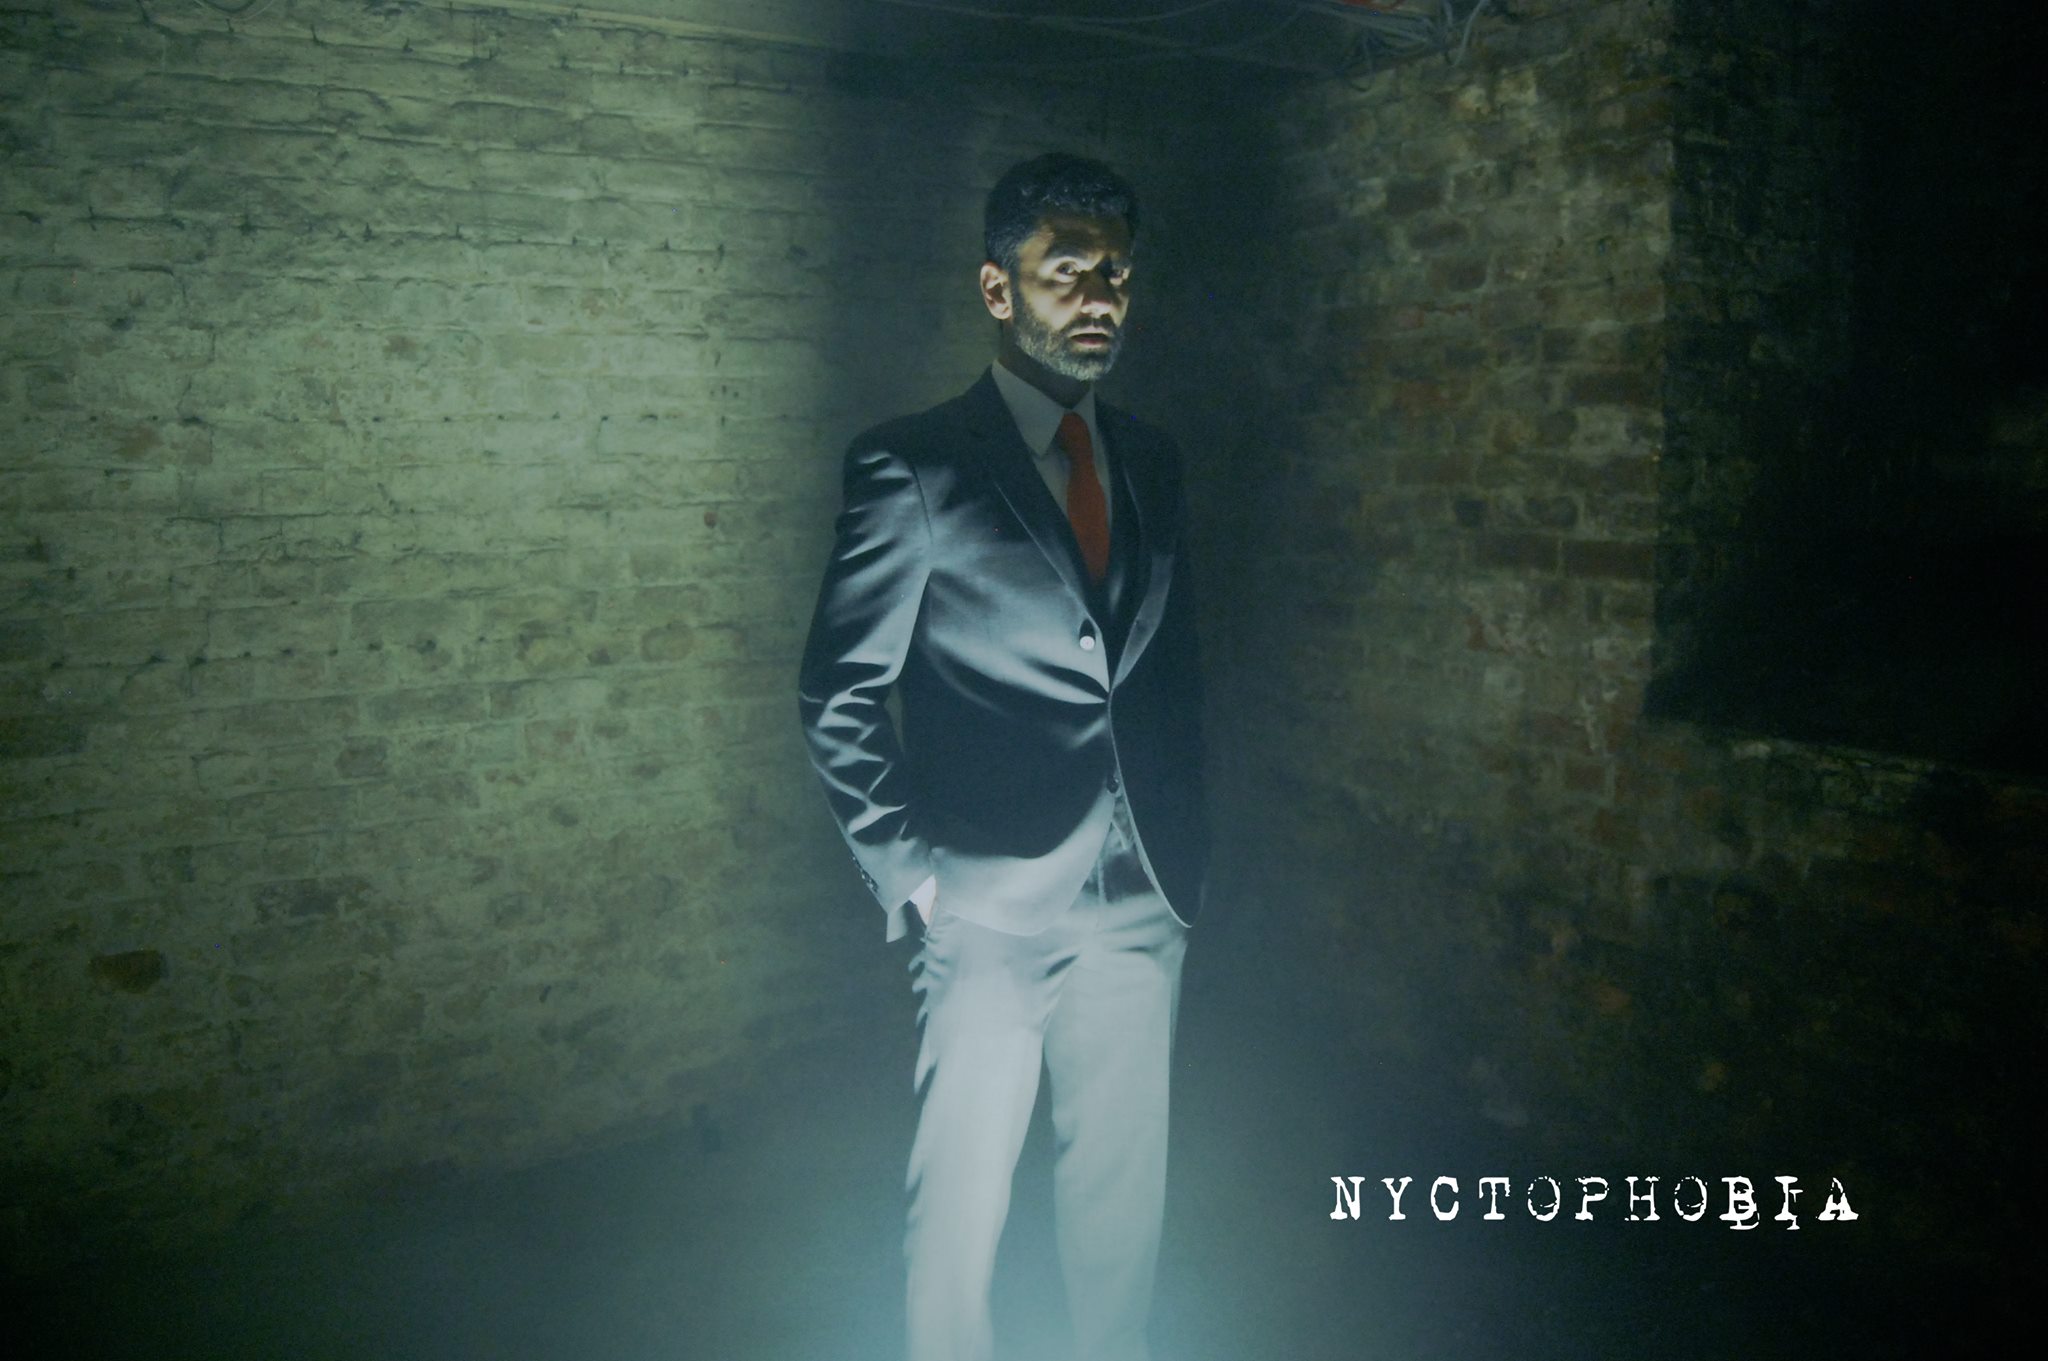 Promo still from the film Nyctophobia (2014) shot in the actual haunted vaults of the Northampton Golf and Country club, UK